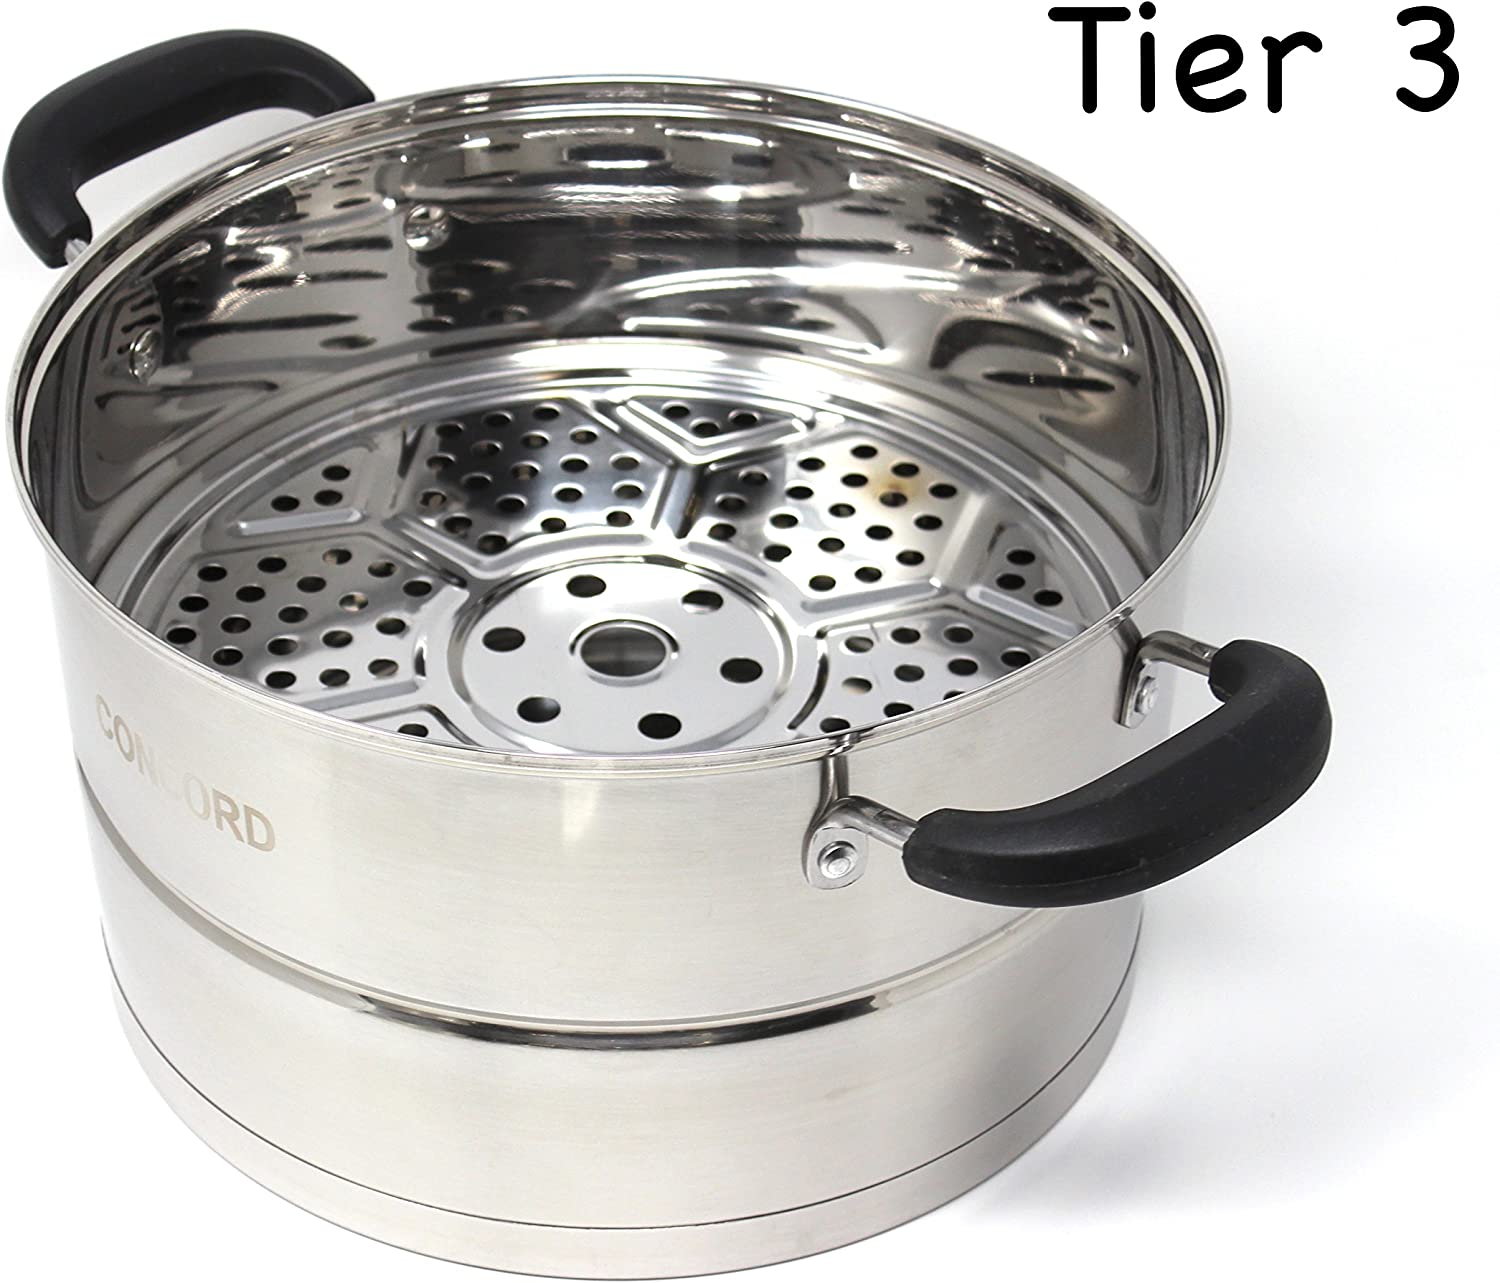 CONCORD 10 Stainless Steel 3 Tier Steamer Steaming Pot Cookware 24 CM  (Induction Compatible)